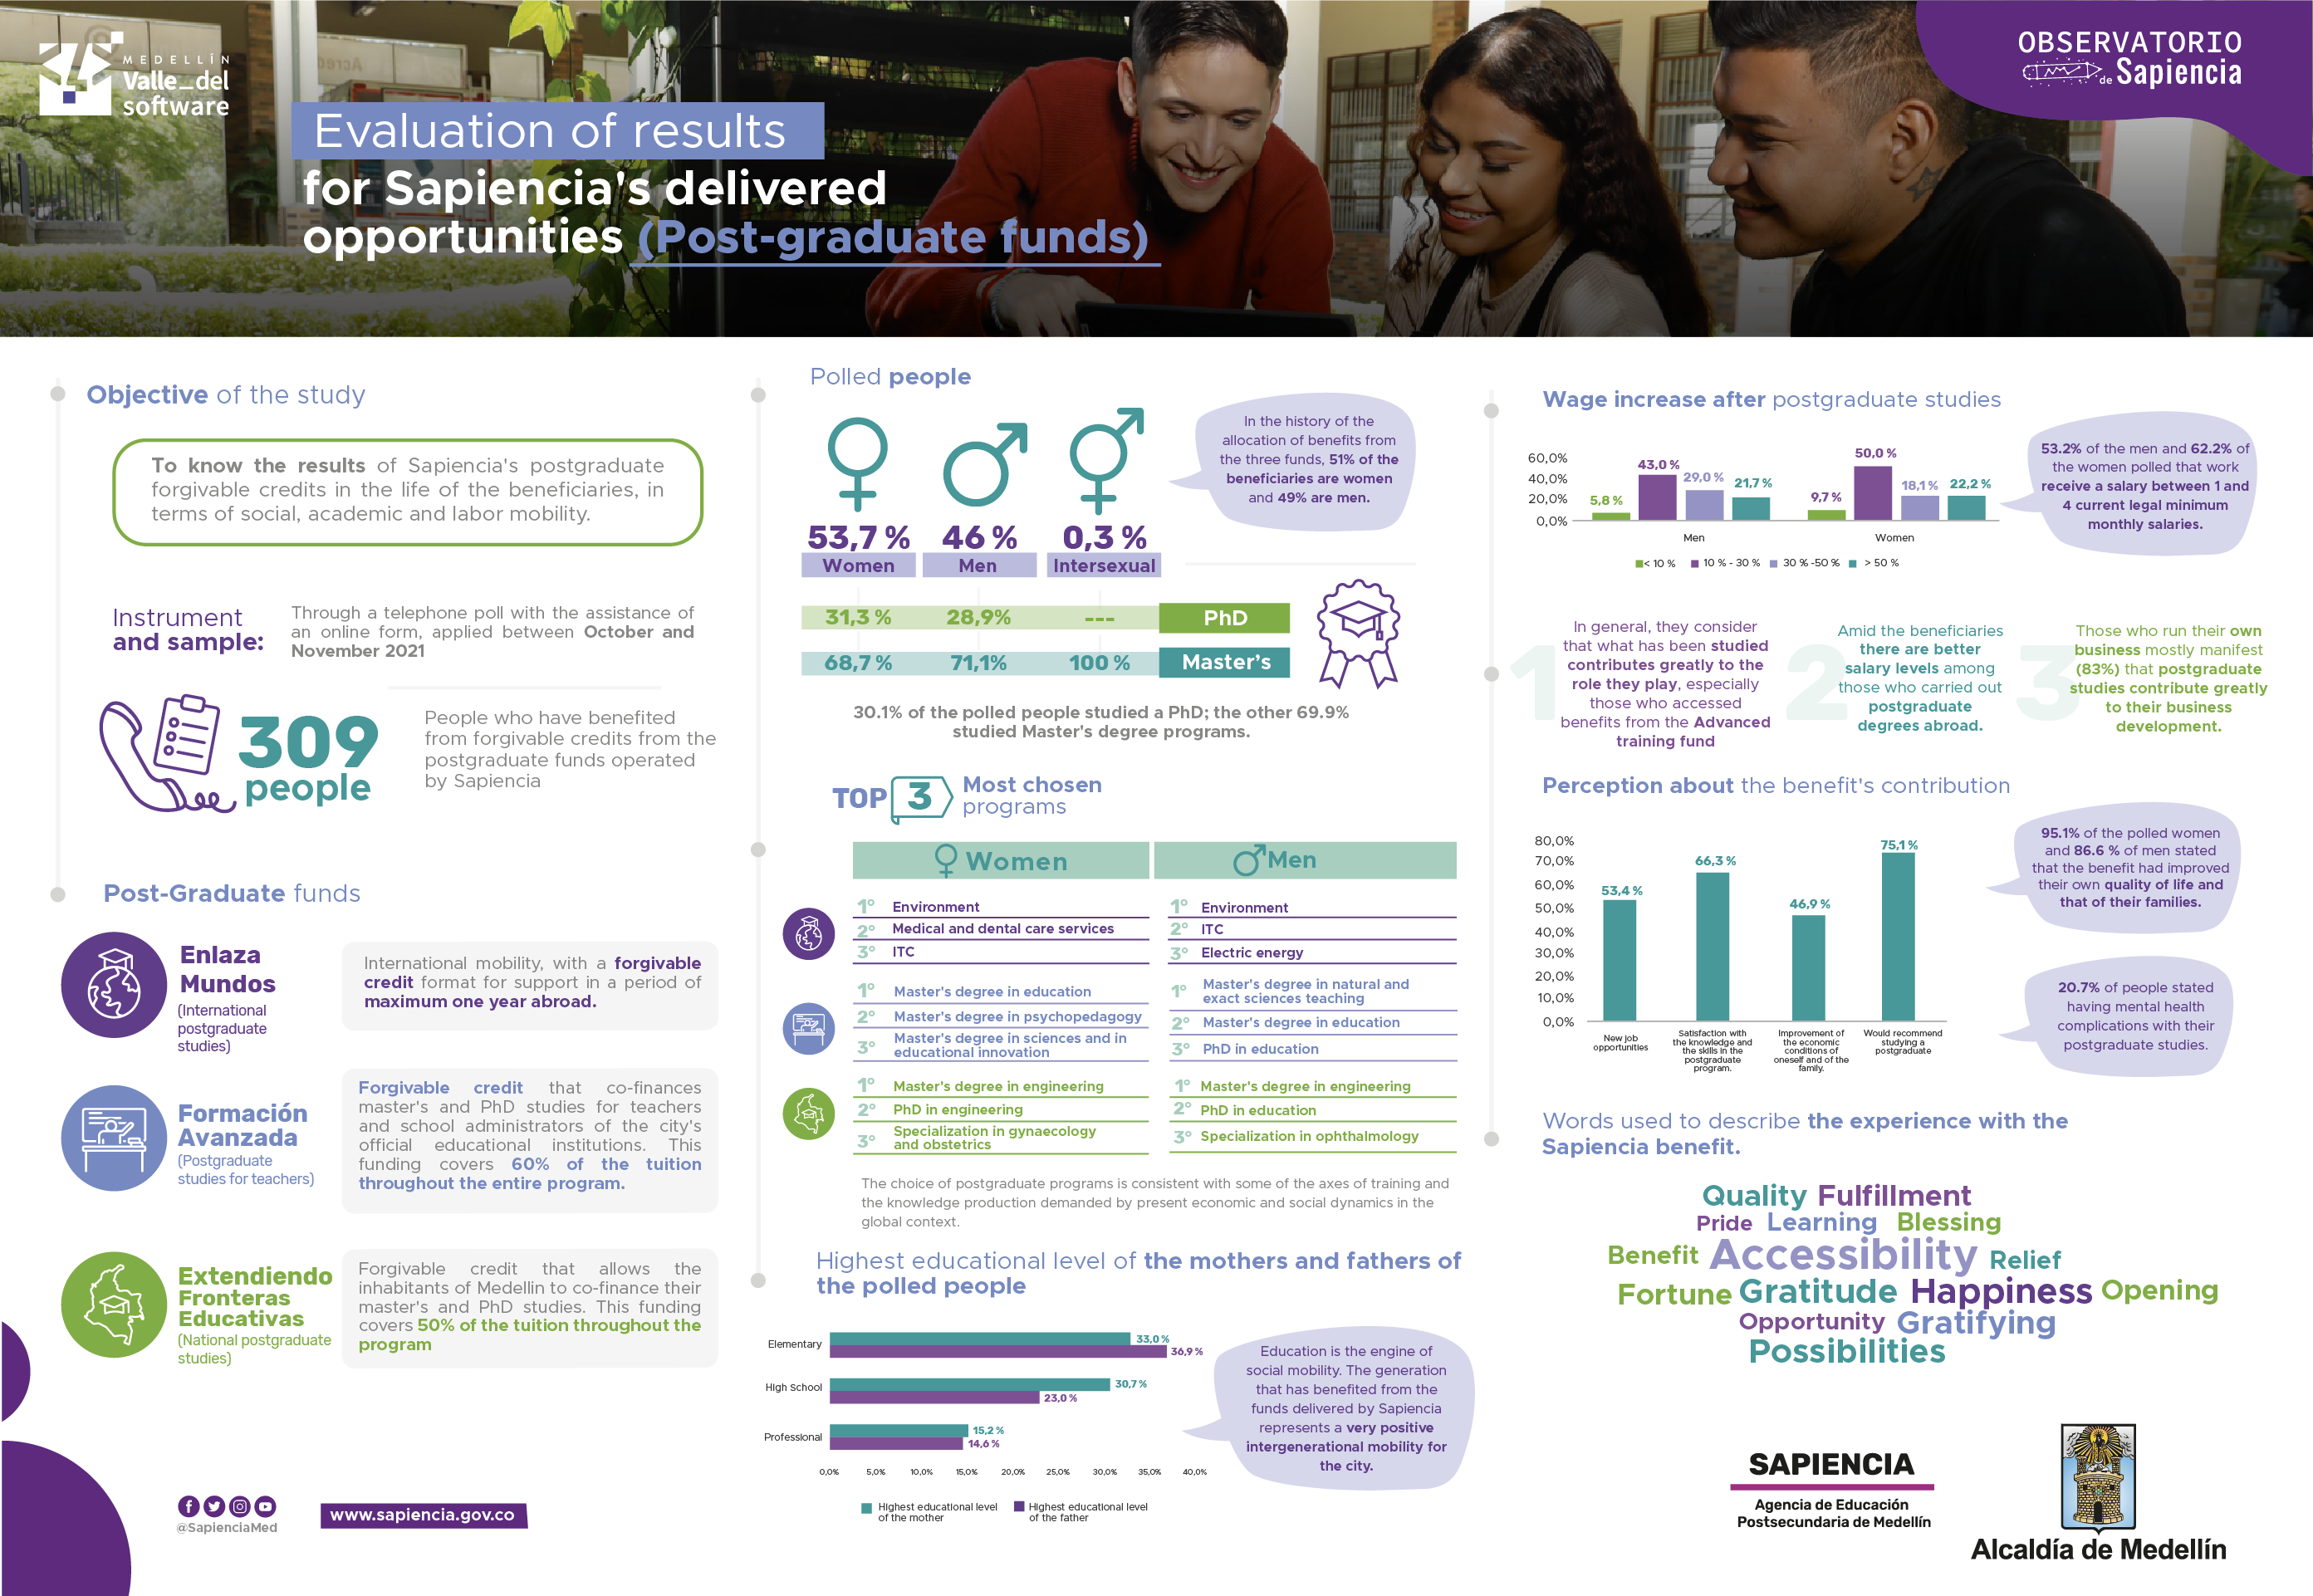 Image Infographic, Evaluation of results for Sapiencia's delivered opportunities